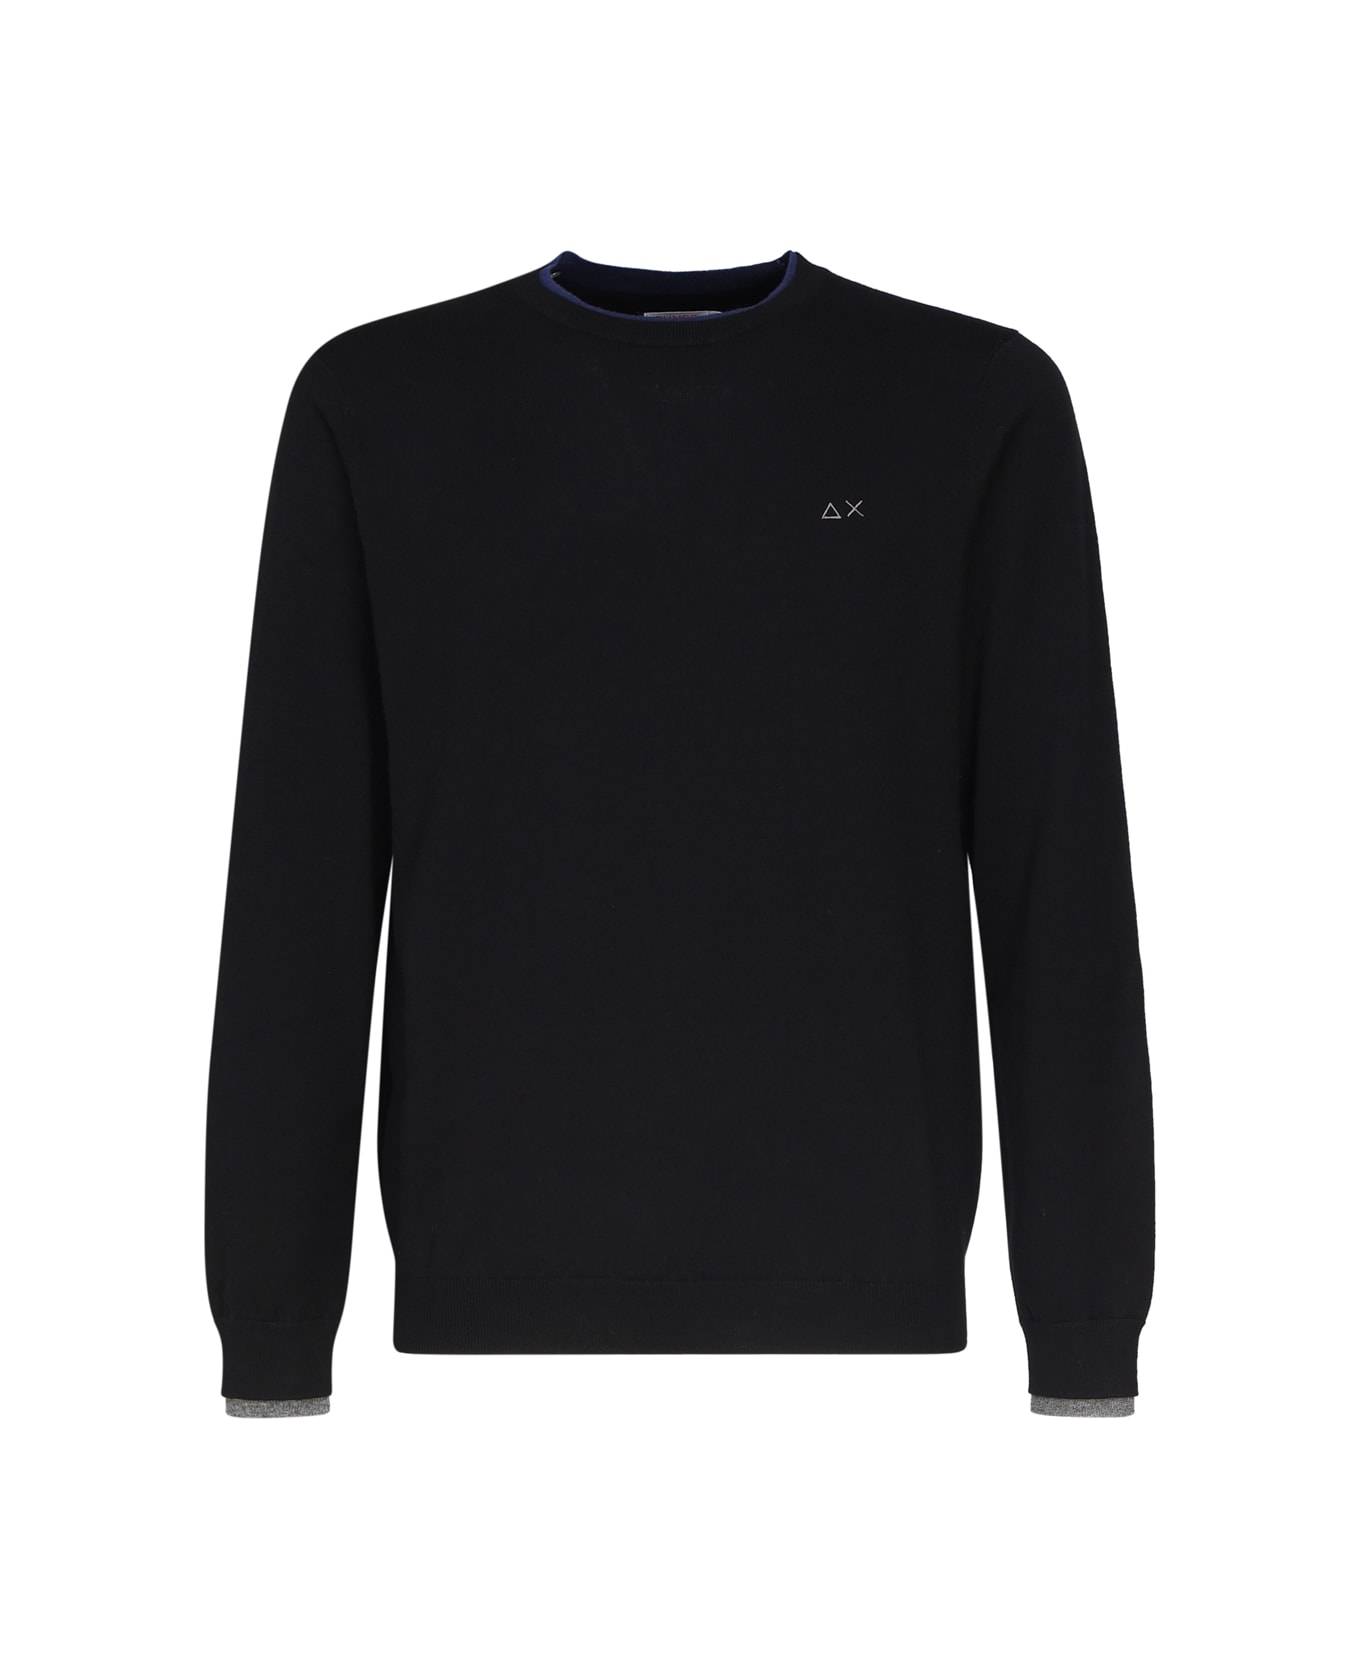 Sun 68 Sweater With Embroidered Logo - Black